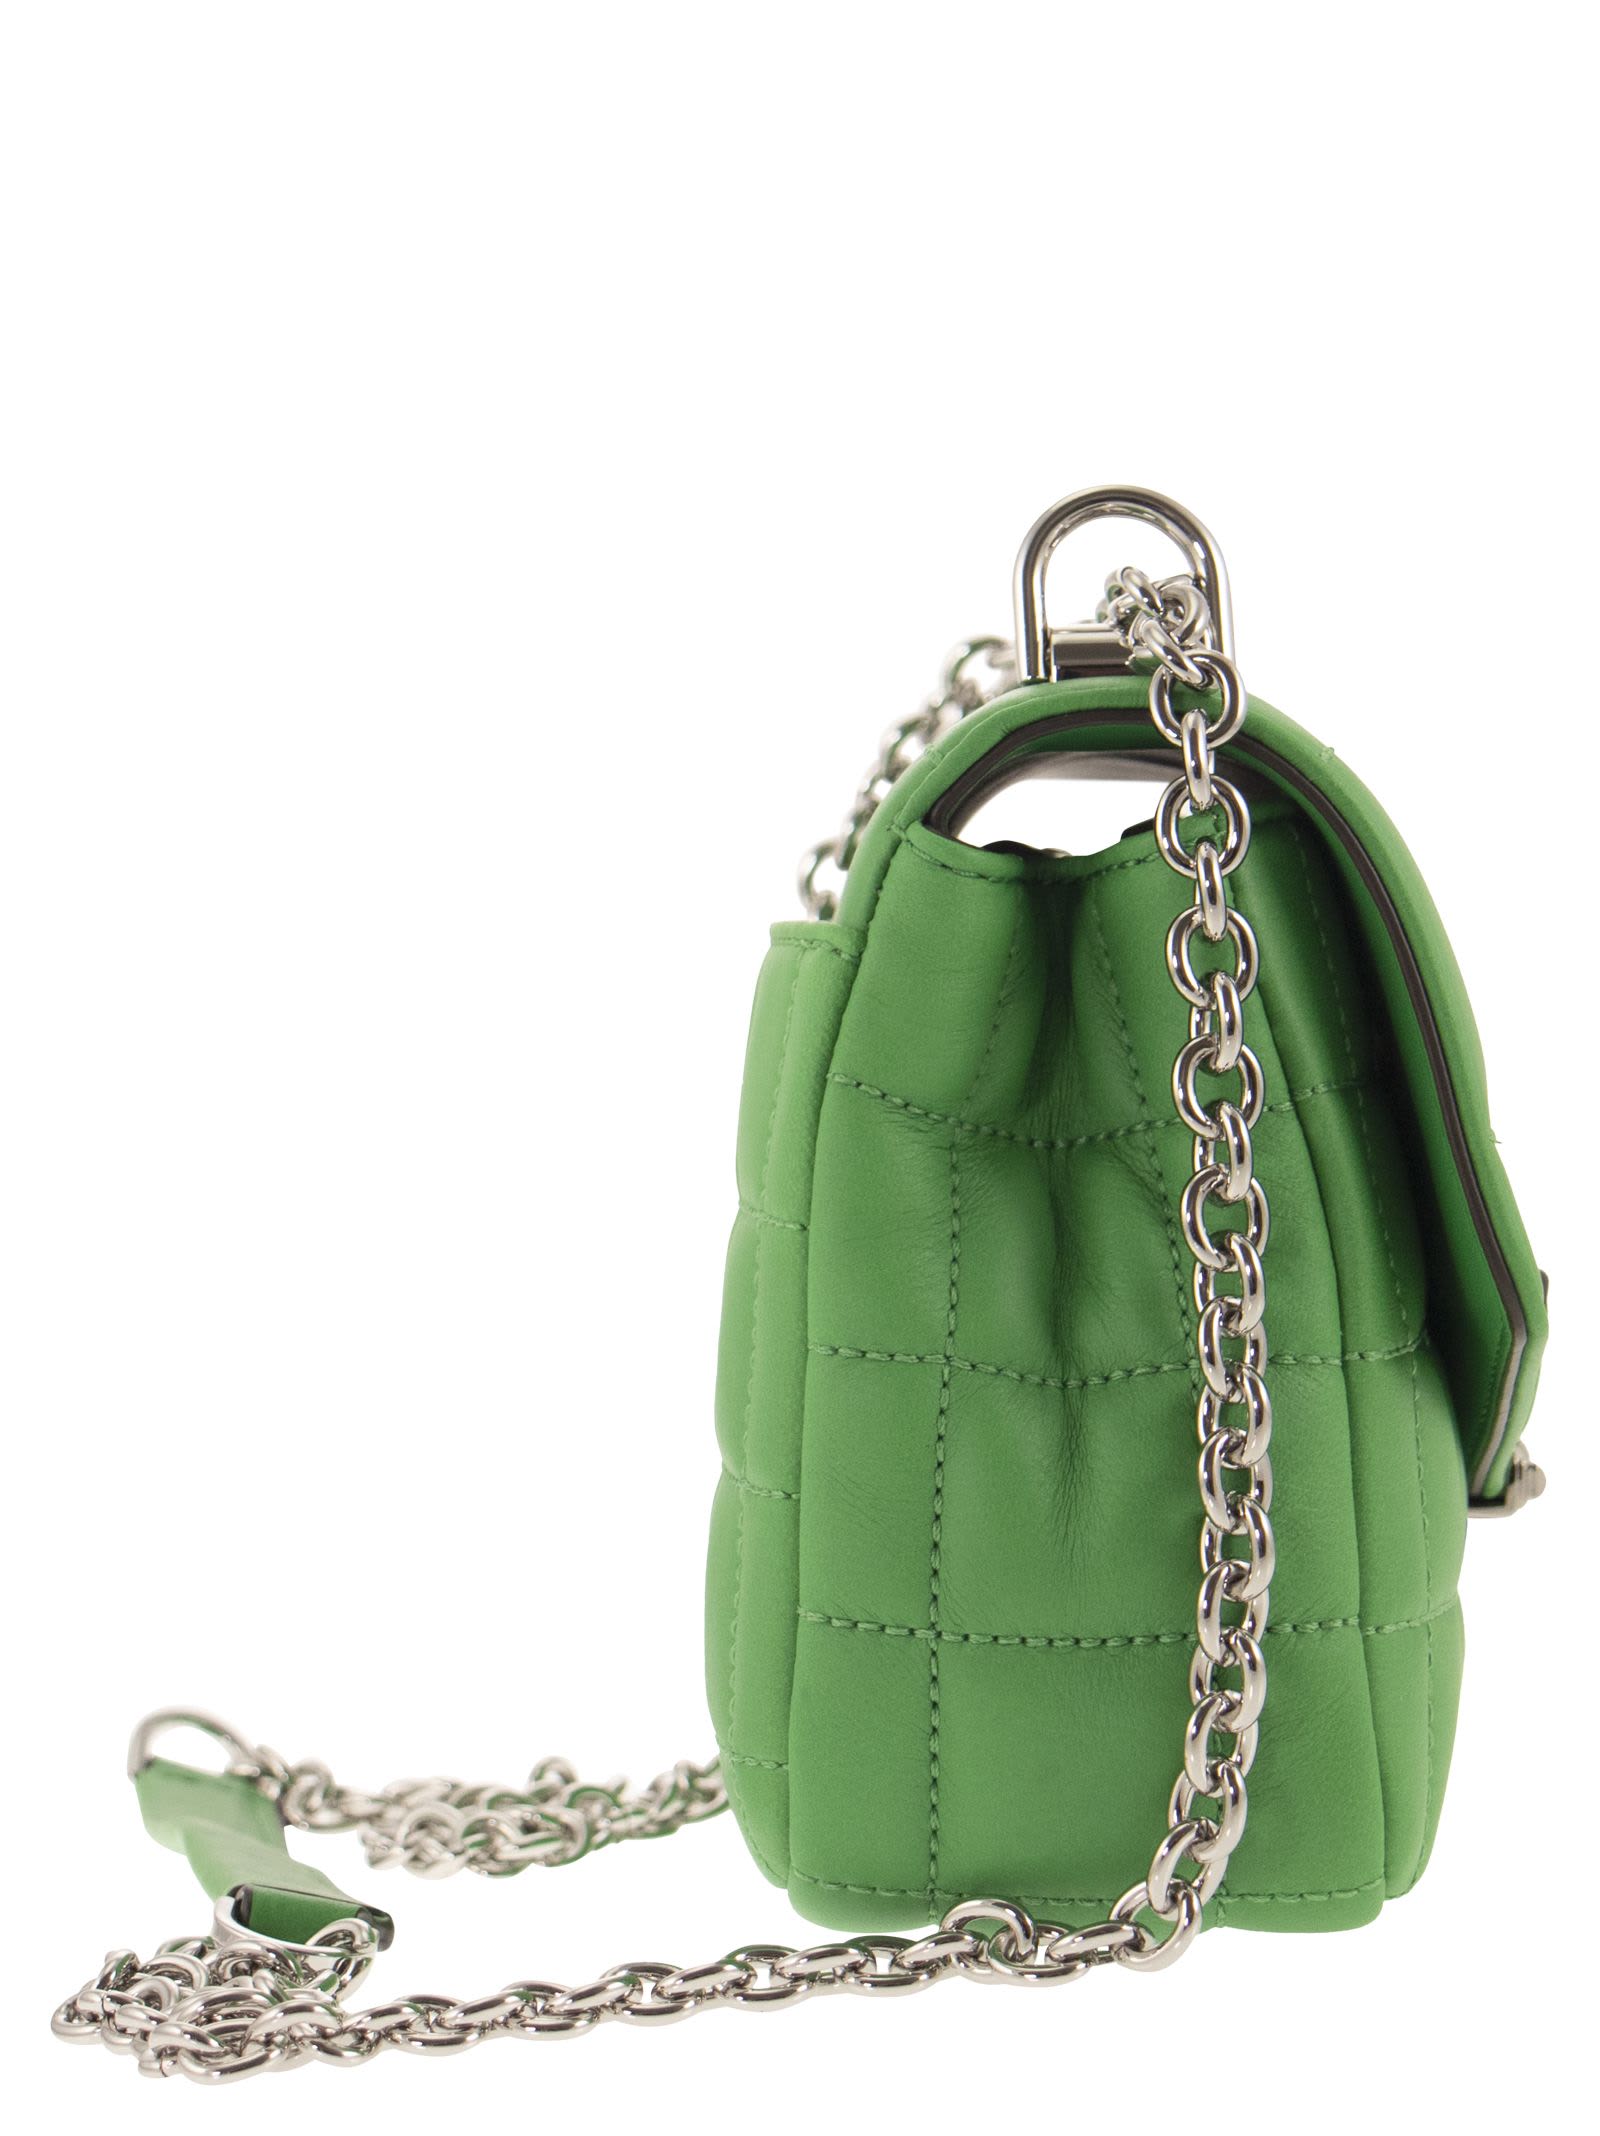 Shop Michael Kors Soho Small Quilted Leather Shoulder Bag In Green